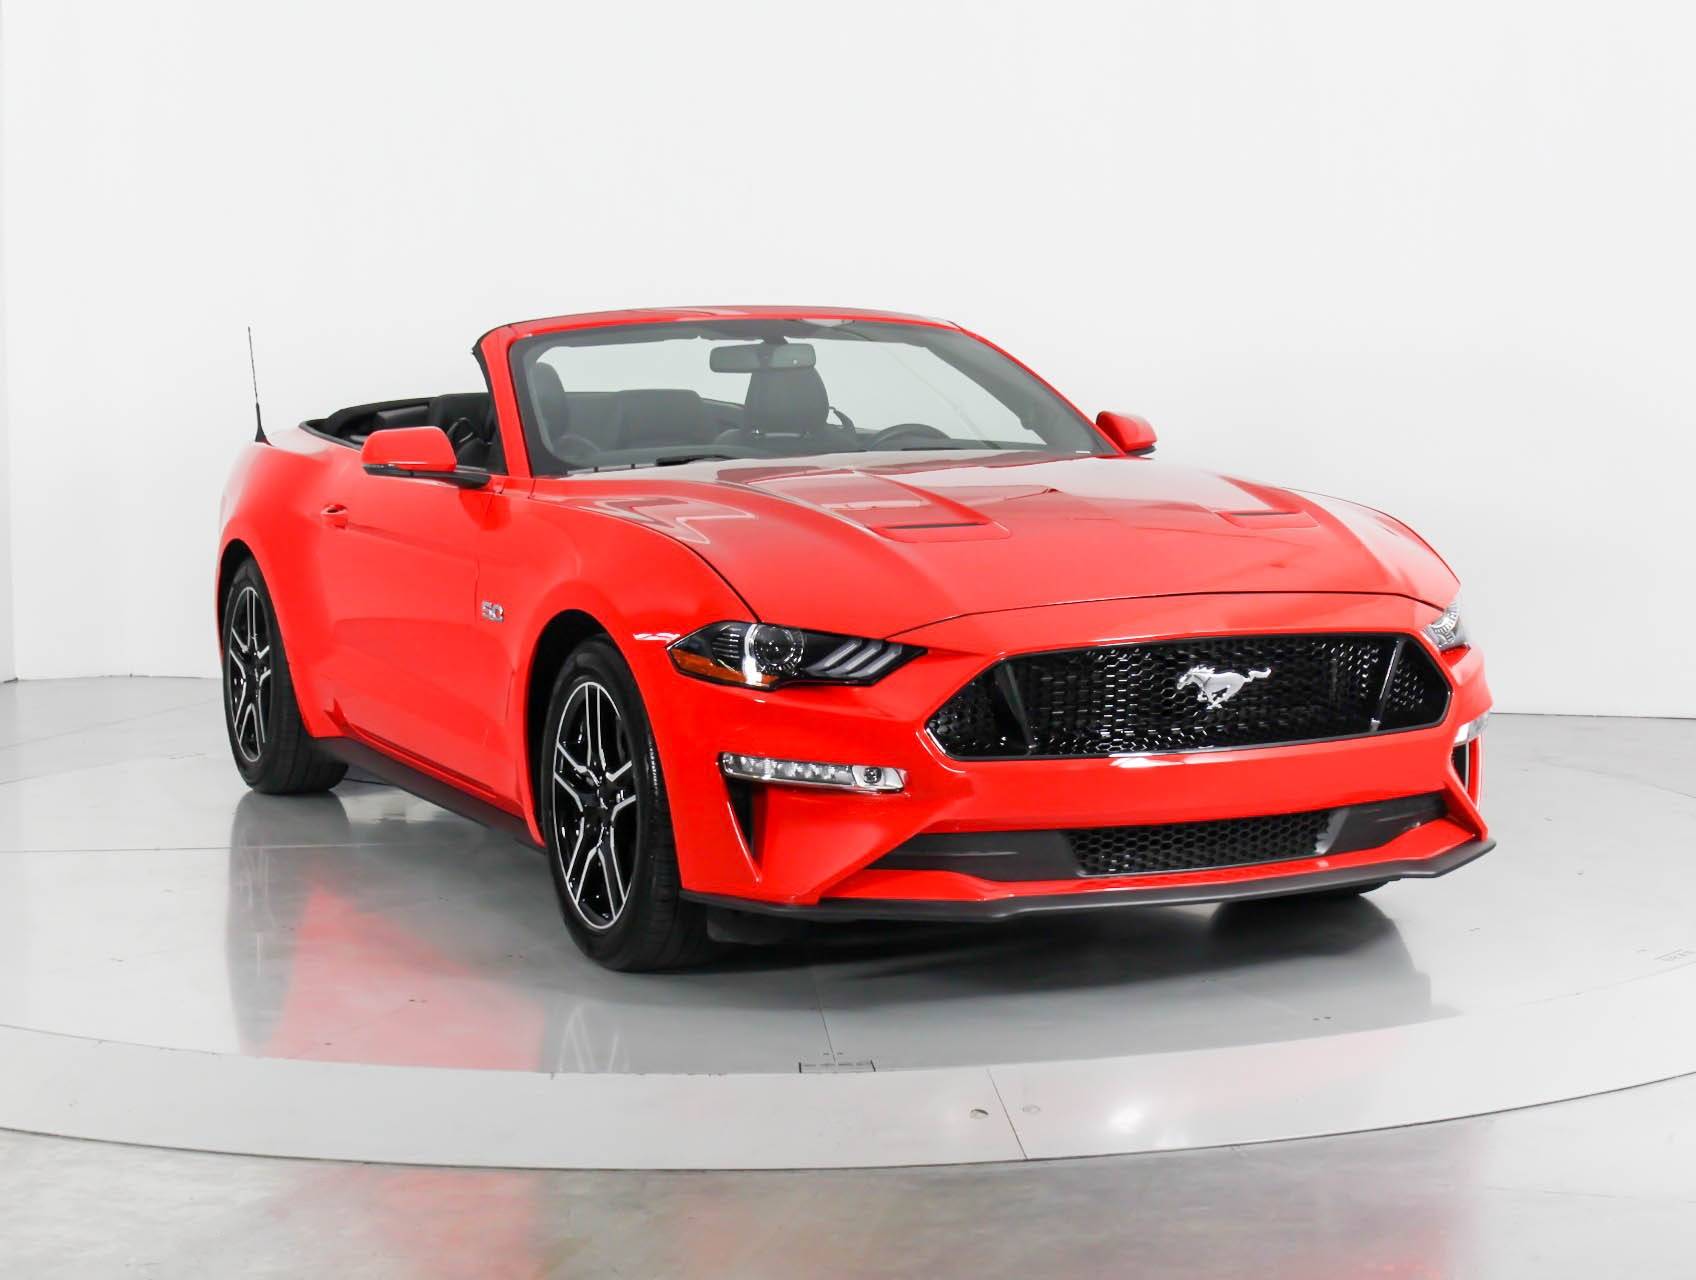 Florida Fine Cars - Used FORD MUSTANG 2018 WEST PALM Gt Premium